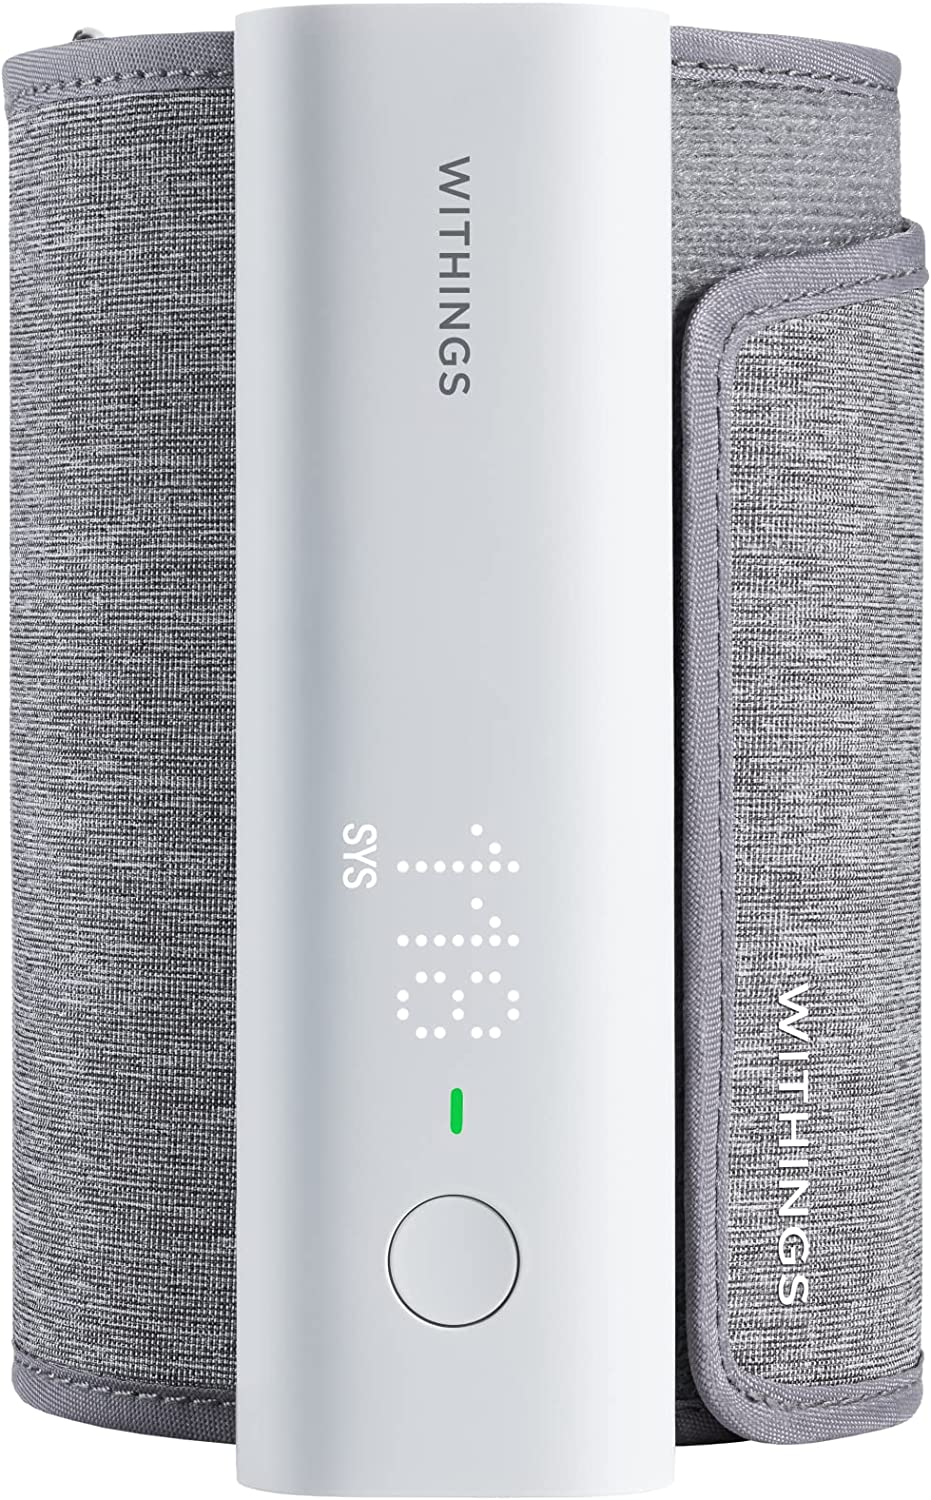 https://www.dontwasteyourmoney.com/wp-content/uploads/2021/08/withings-wi-fi-fda-approved-blood-pressure-monitor.jpg